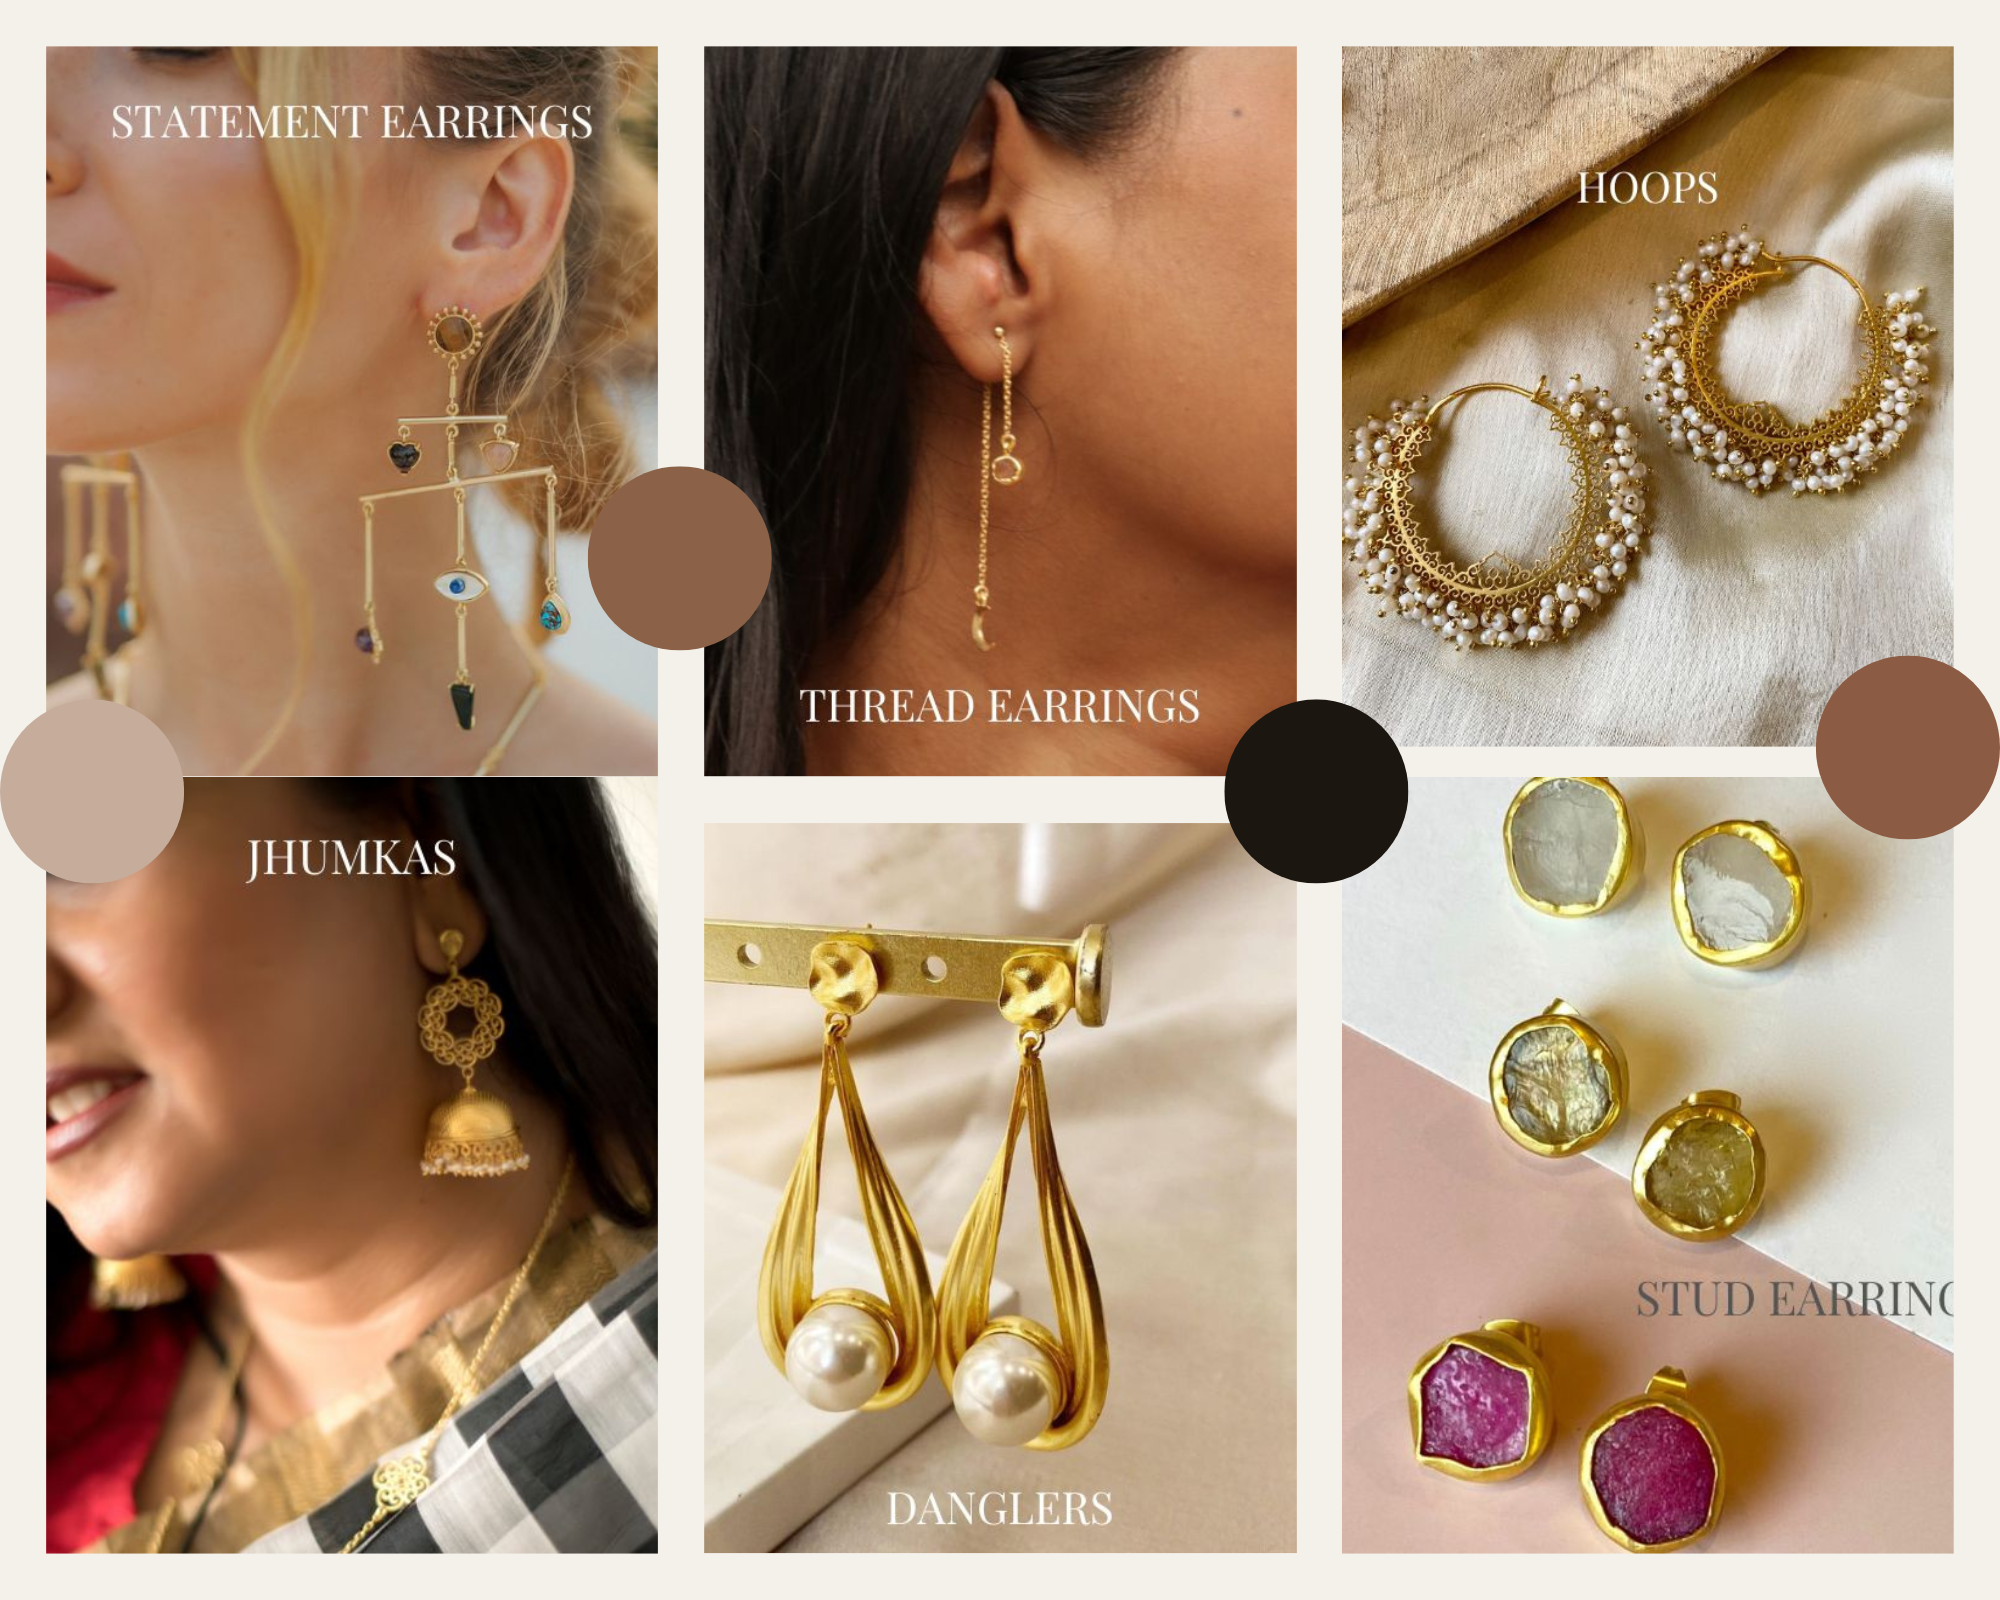 Glow in Grace: Polki Earrings for Every Fashion Enthusiast